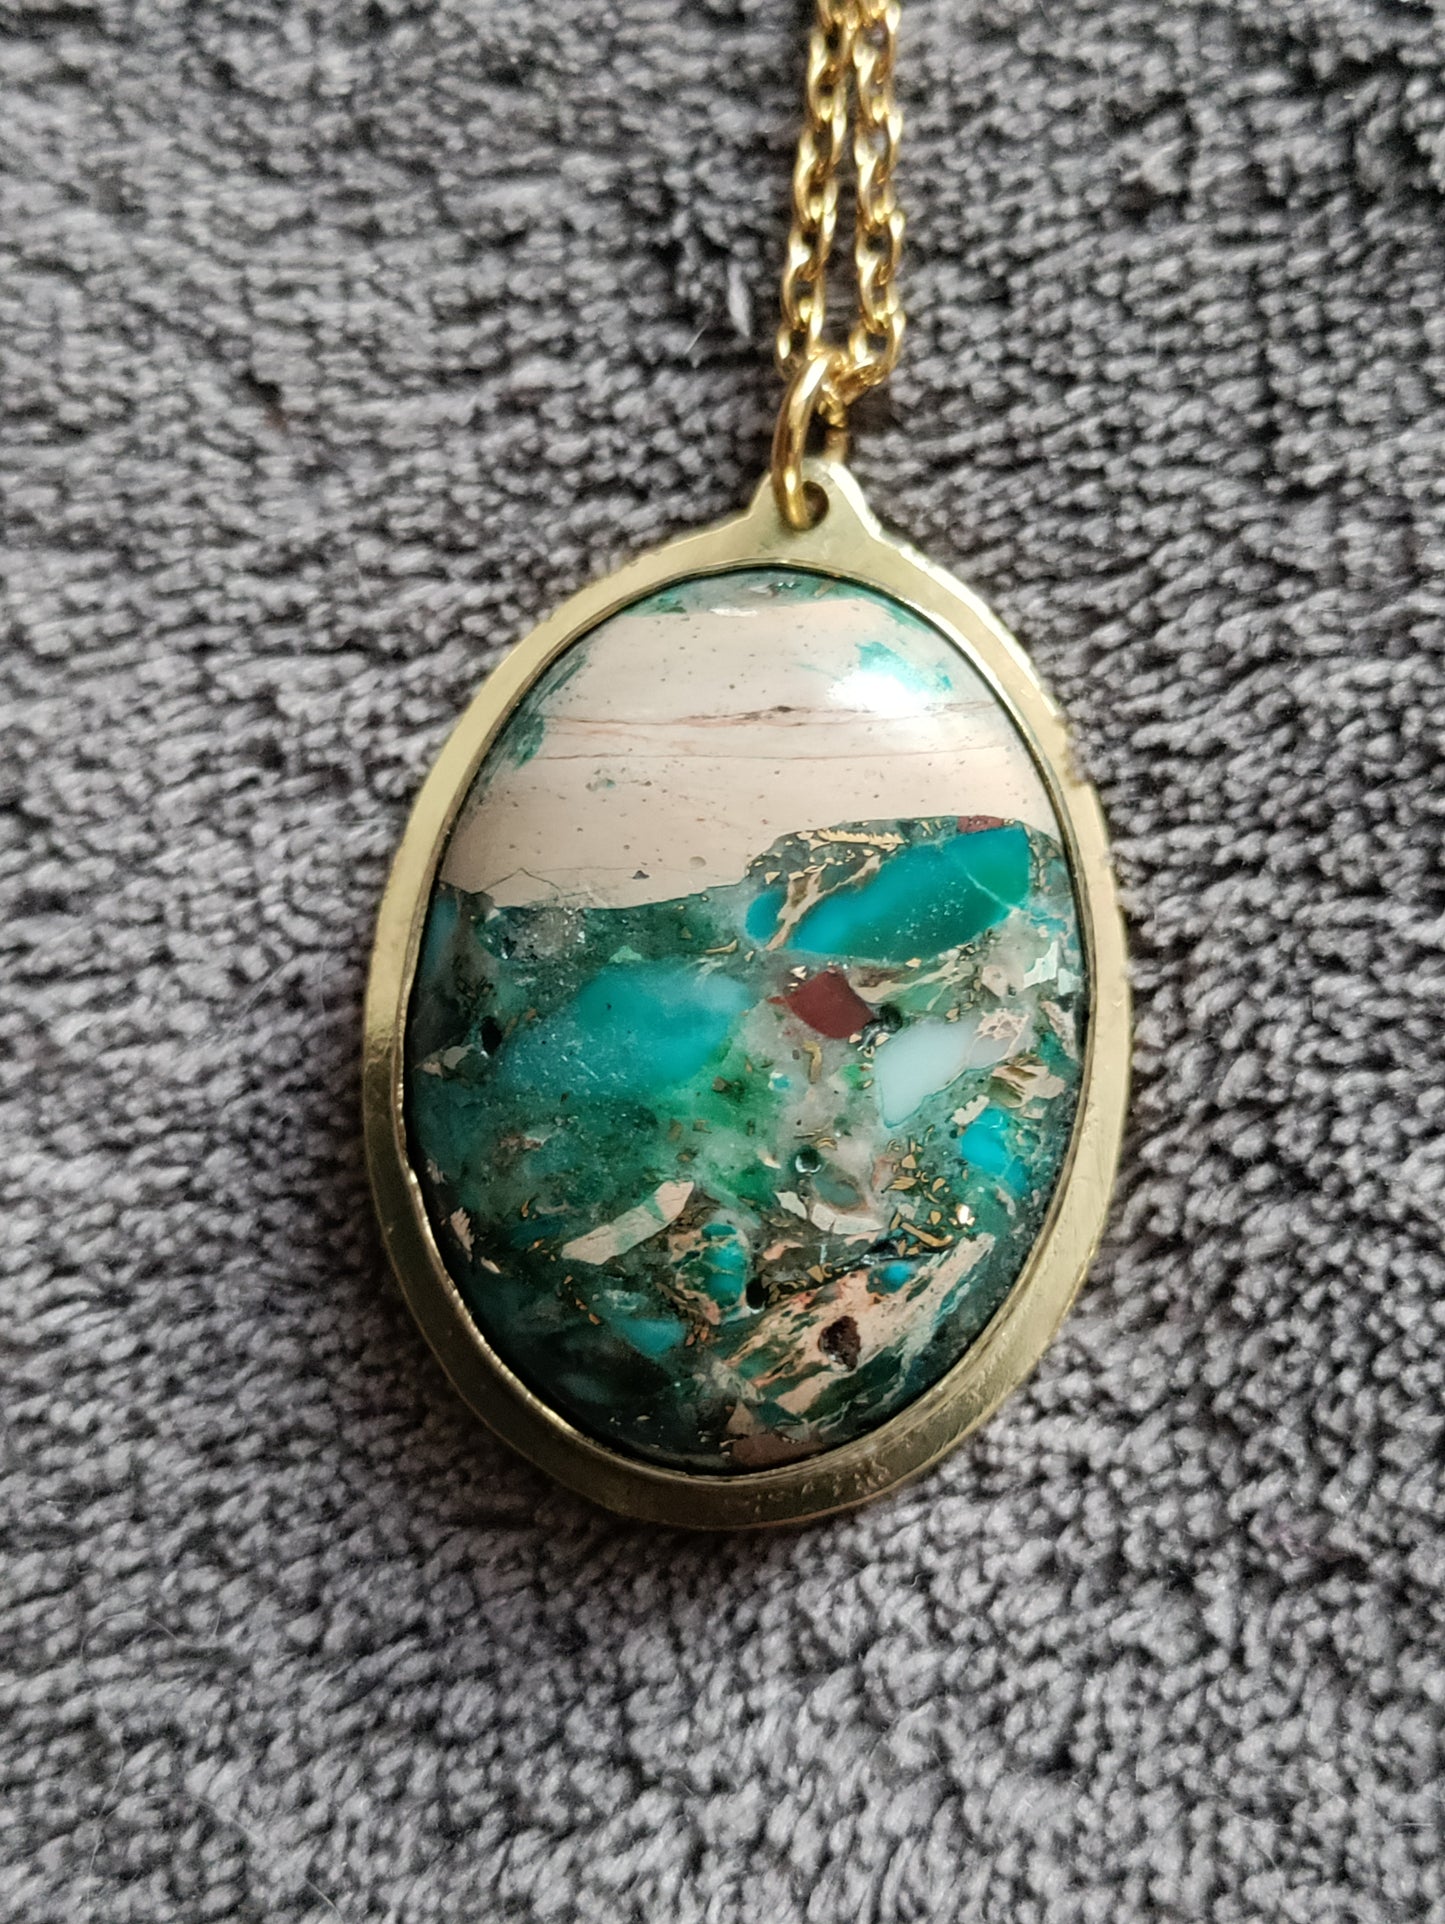 Turquoise Green Jasper and golden brass necklace LEIA&CO